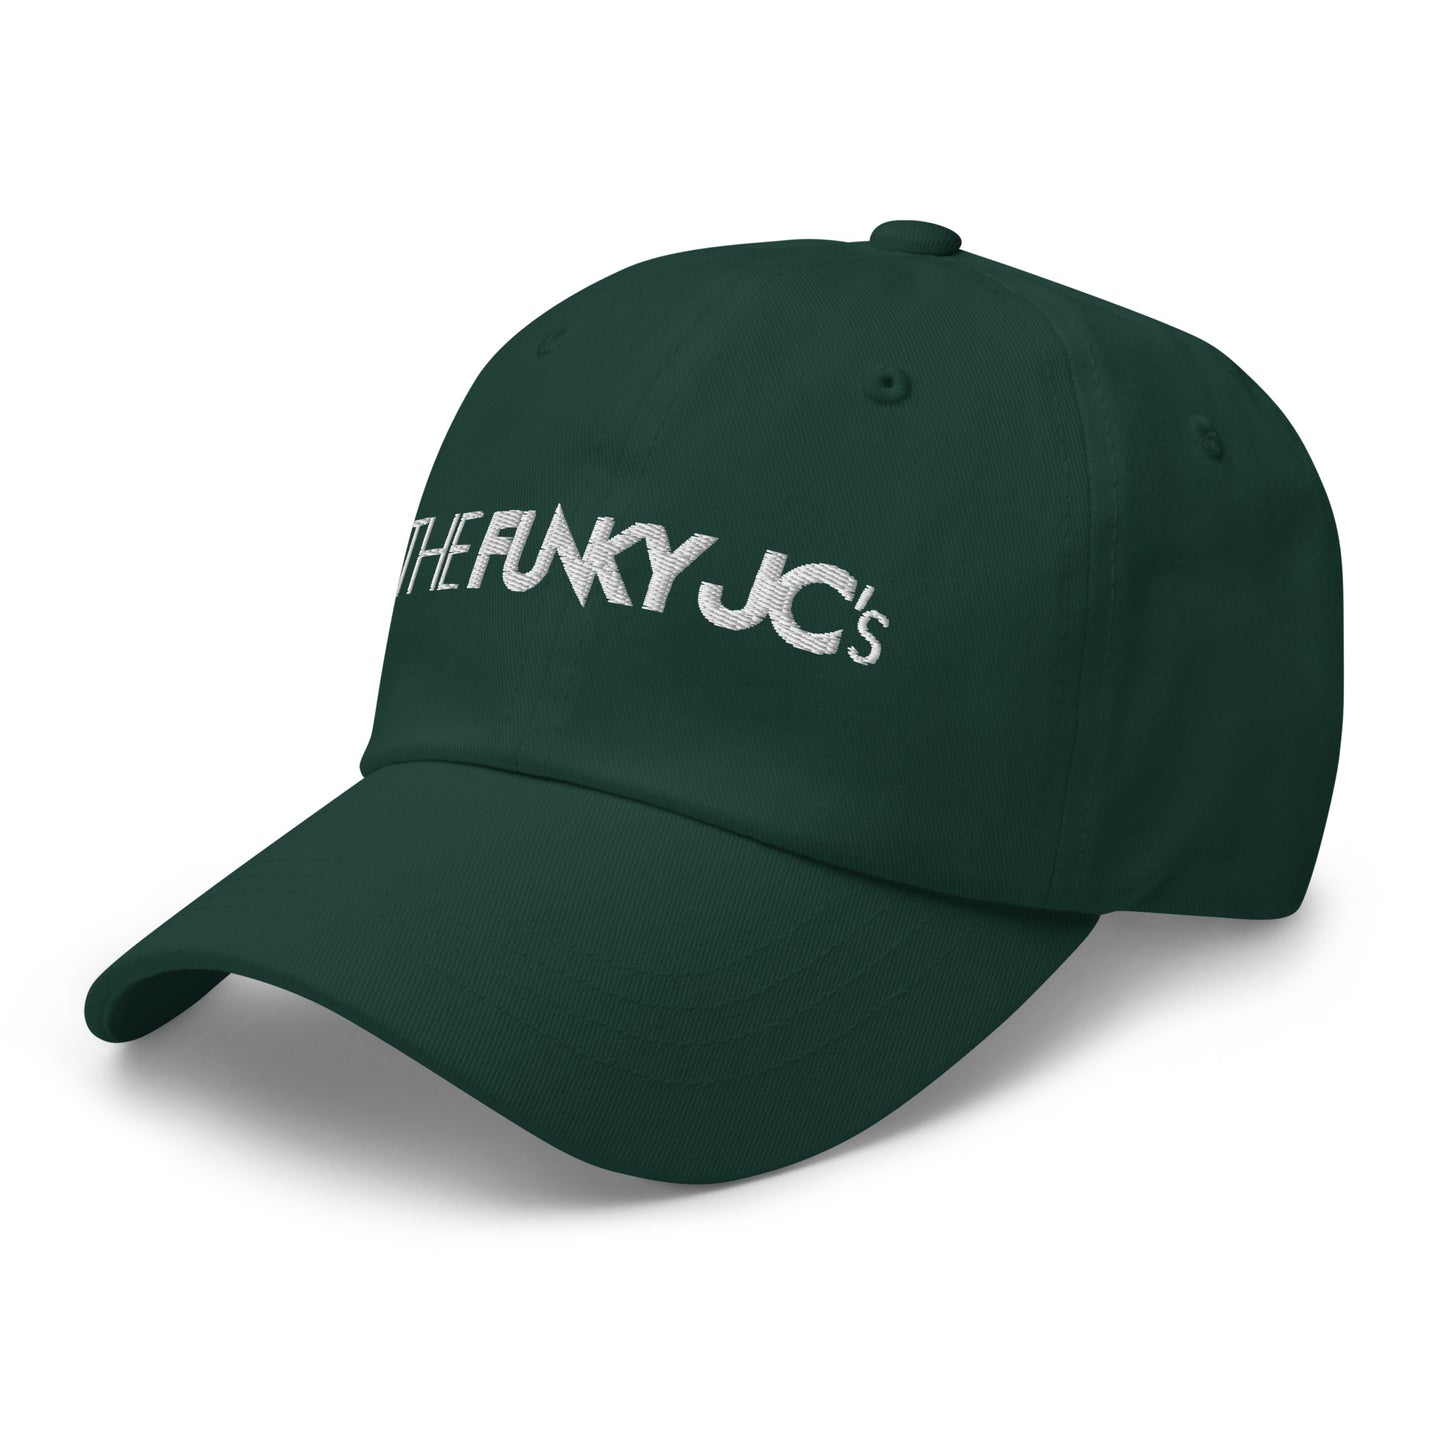 The Funky Jcs Dad hat